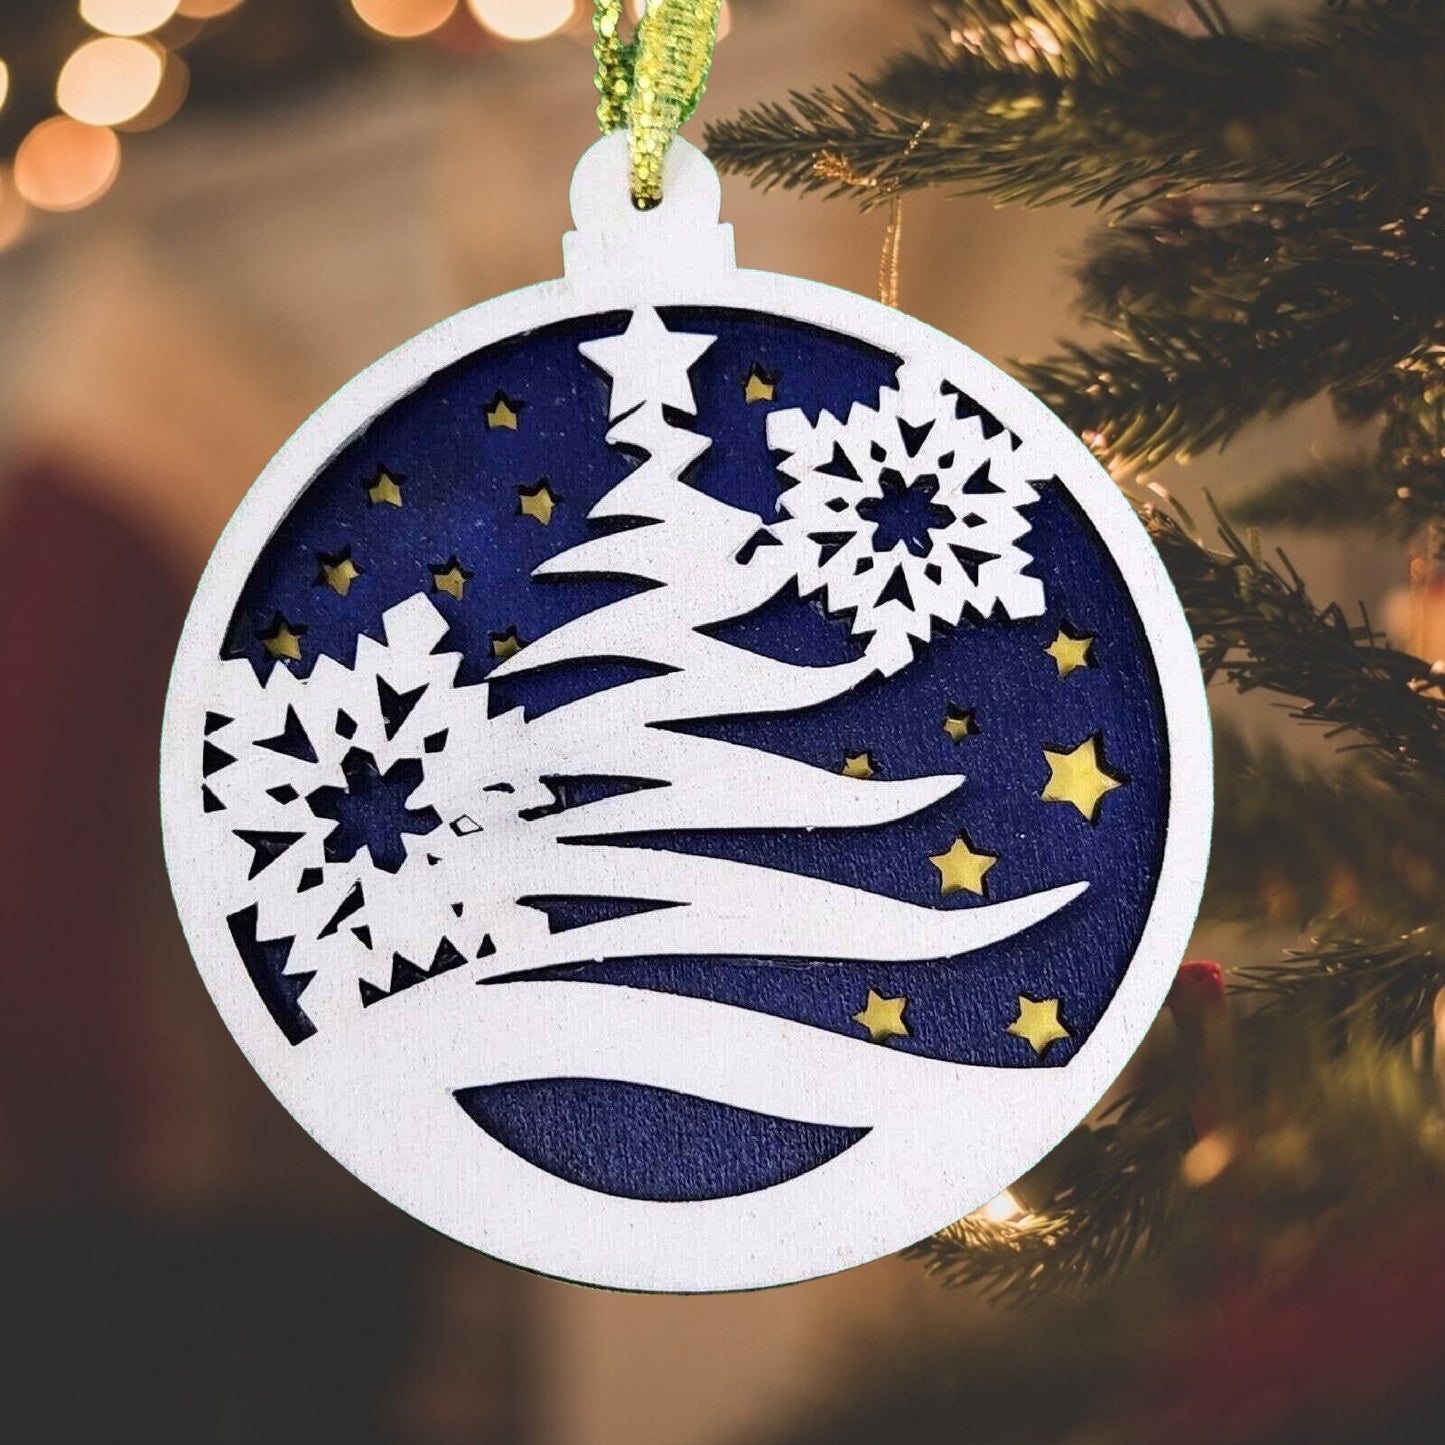 Handmade Wooden Christmas Ornament: Laser Cut Snowflakes on a Round Bauble, Tree Decoration